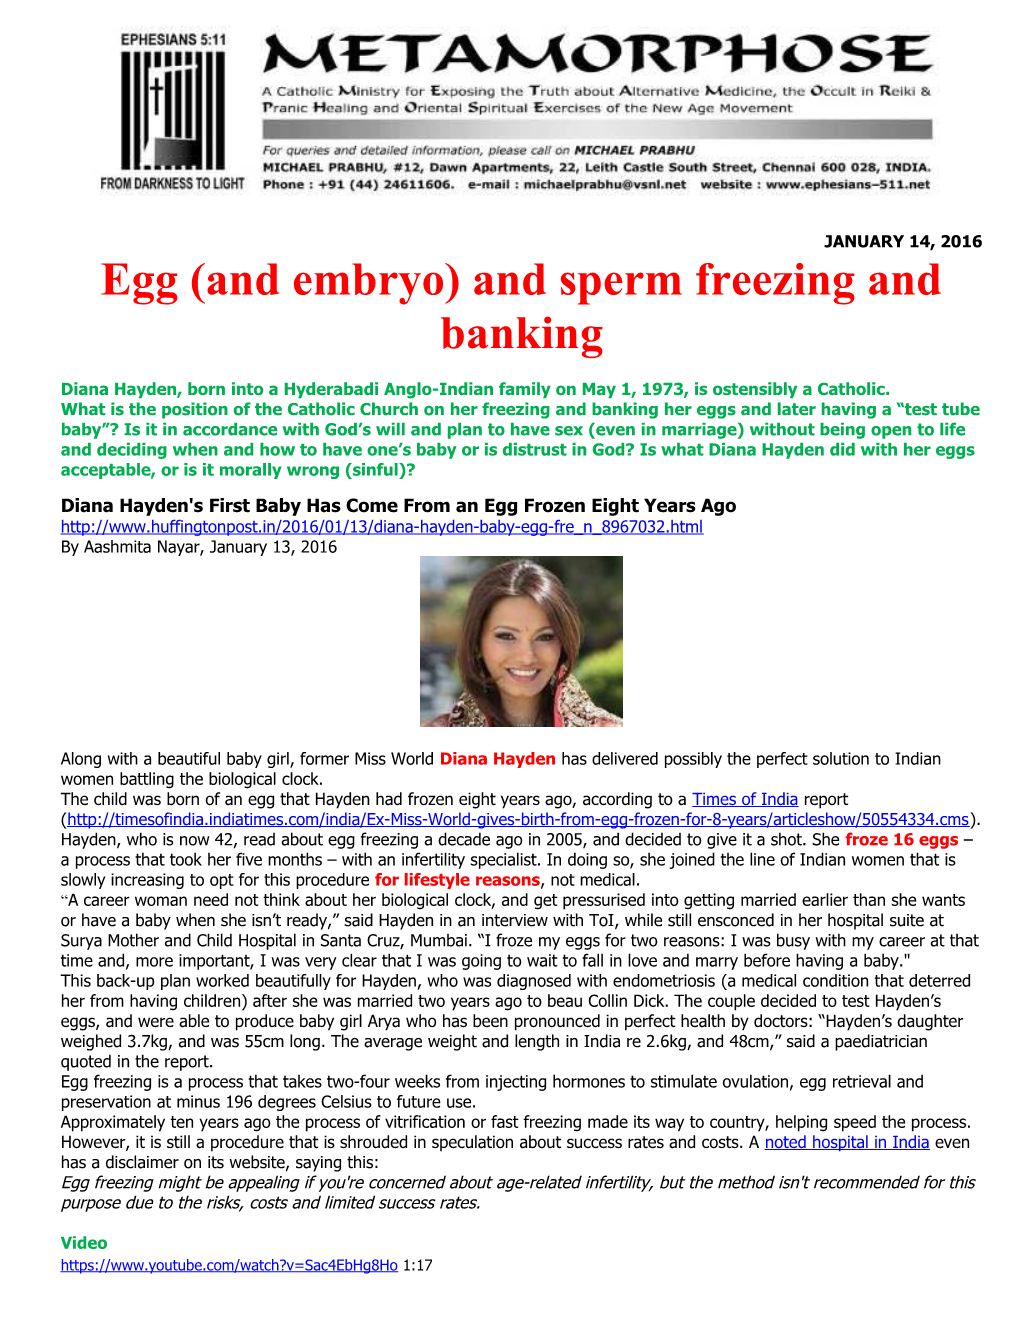 Egg (And Embryo) and Sperm Freezing and Banking